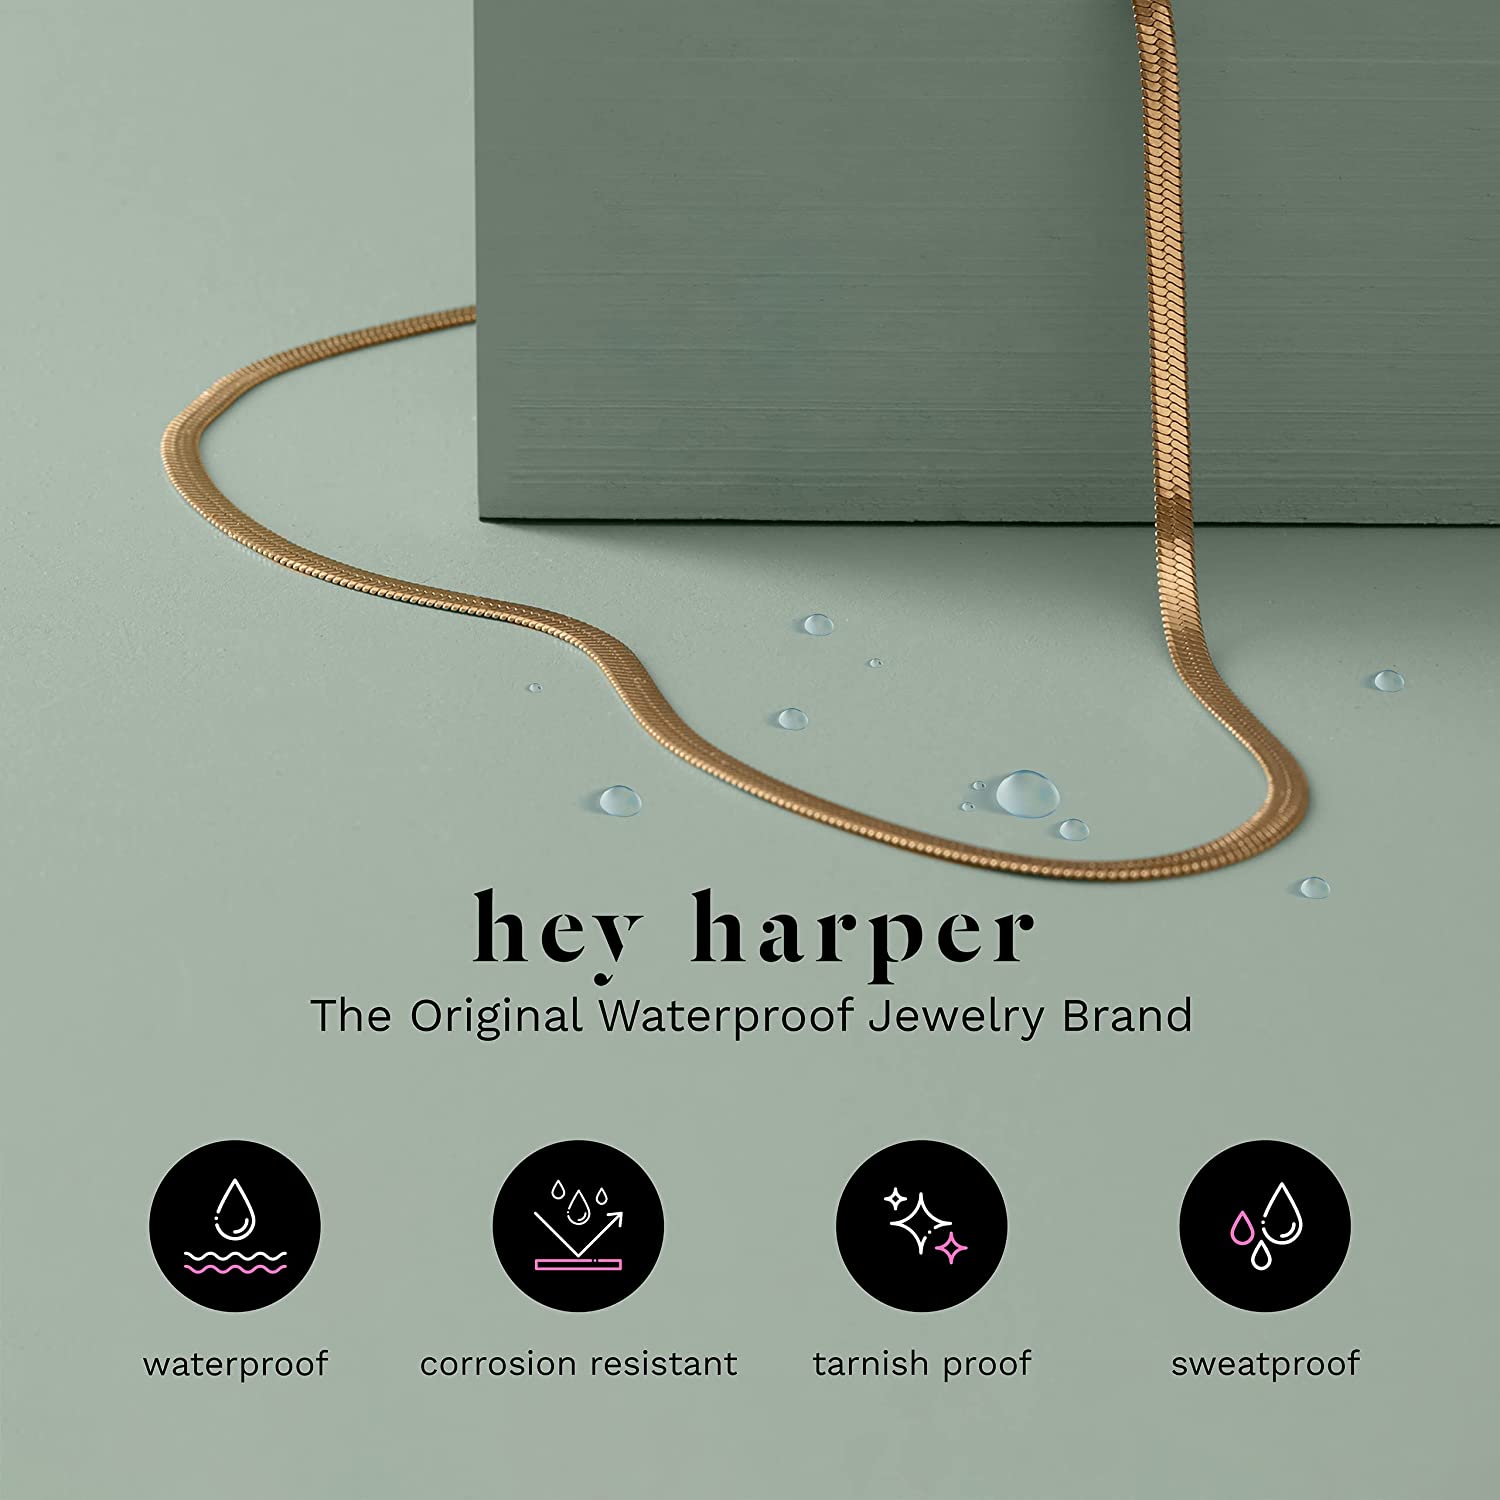 Hey Harper Nassau Necklace - Waterproof & Sweatproof Simple Womens Necklaces for Everyday Wear - Silver, Rose Gold, Gold Necklaces for Women - Stainless Steel Necklace - Herringbone Chain with 14k Golden Color PVD Coating - Necklaces for Women Tre